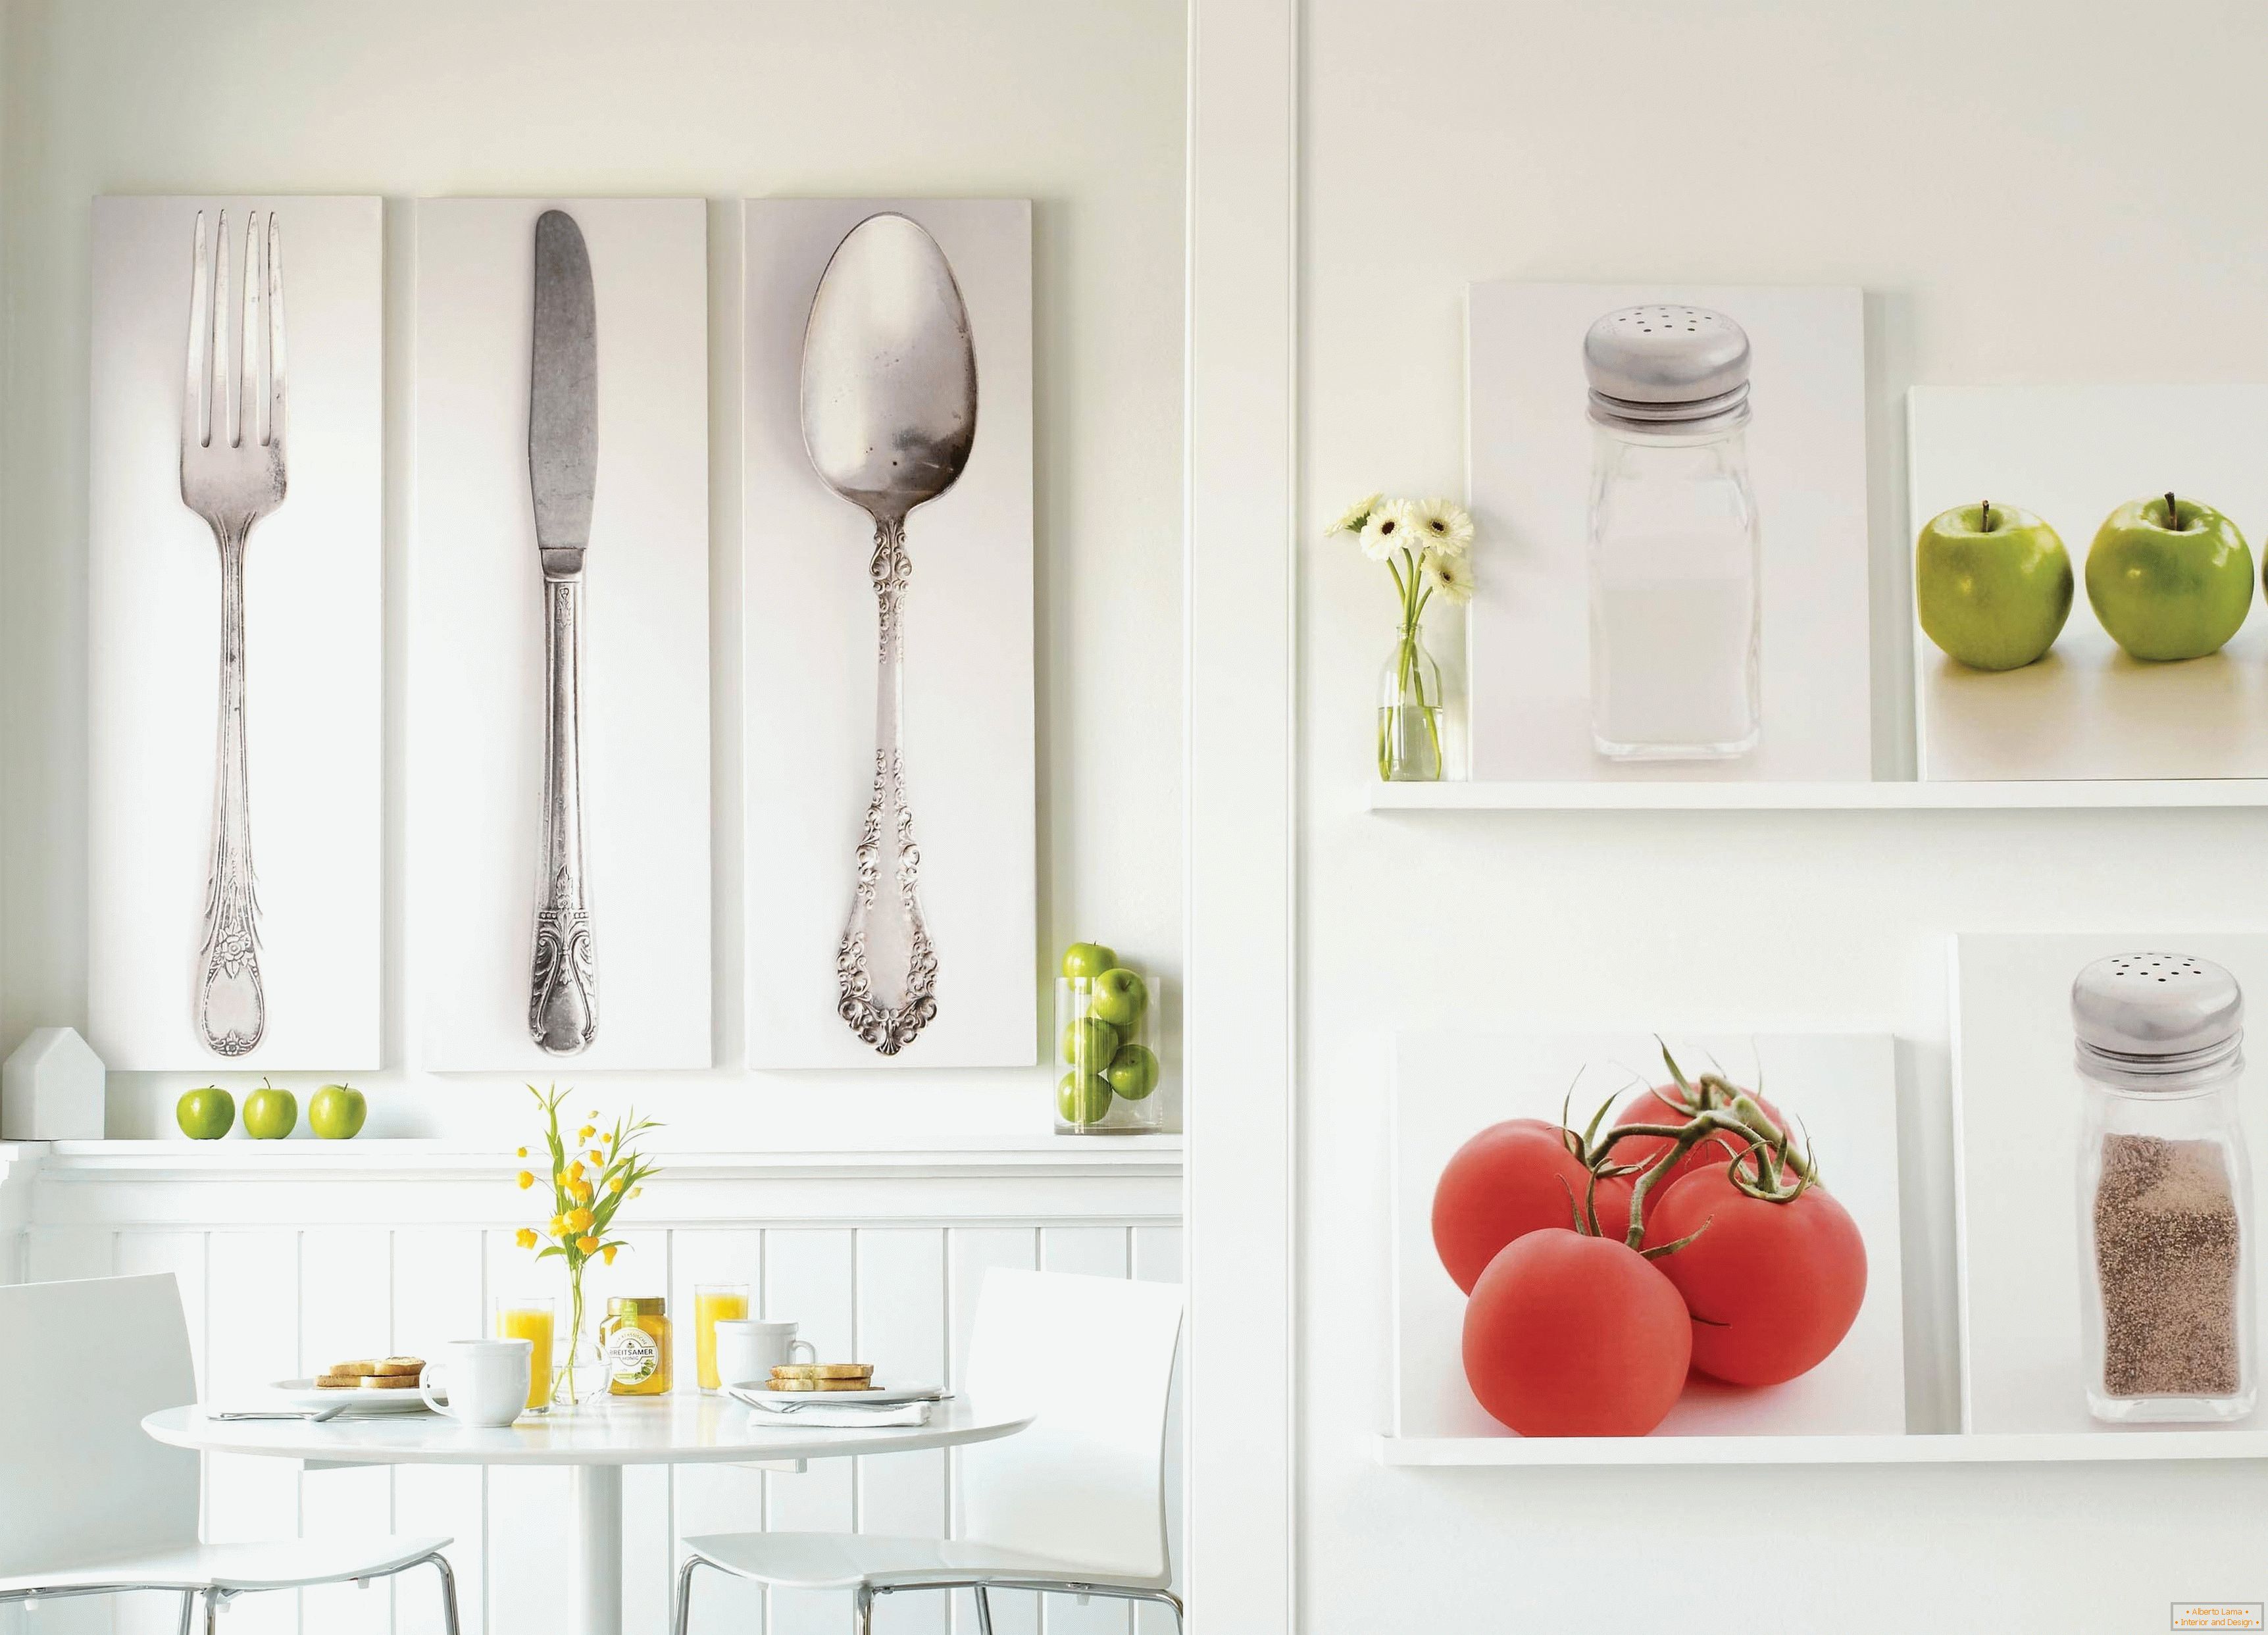 Triptych on the kitchen wall